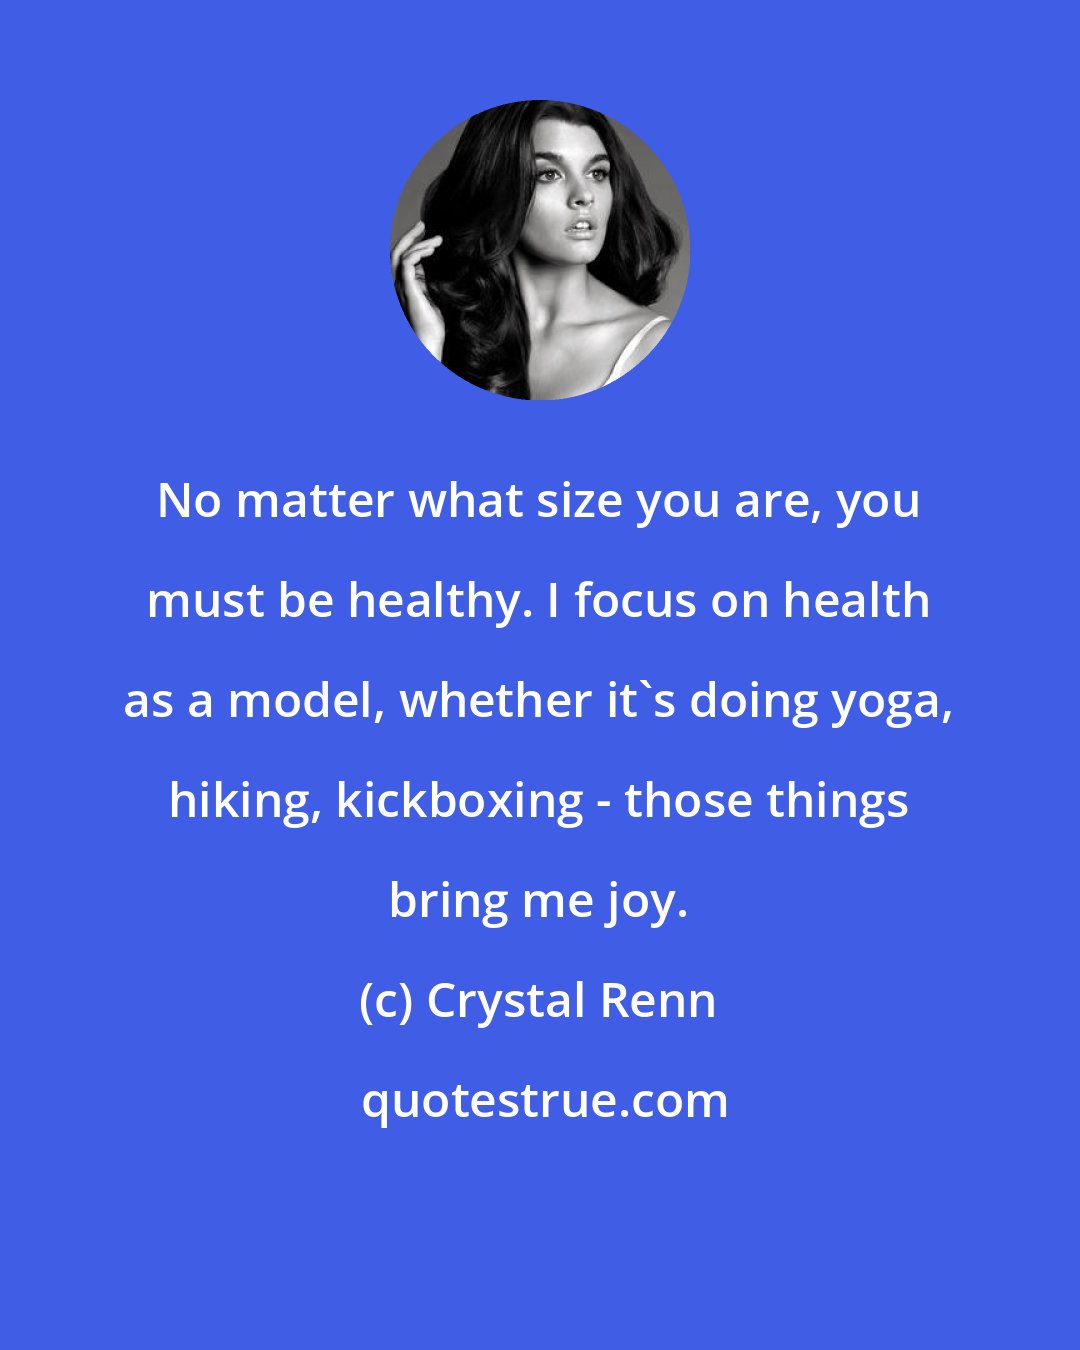 Crystal Renn: No matter what size you are, you must be healthy. I focus on health as a model, whether it's doing yoga, hiking, kickboxing - those things bring me joy.